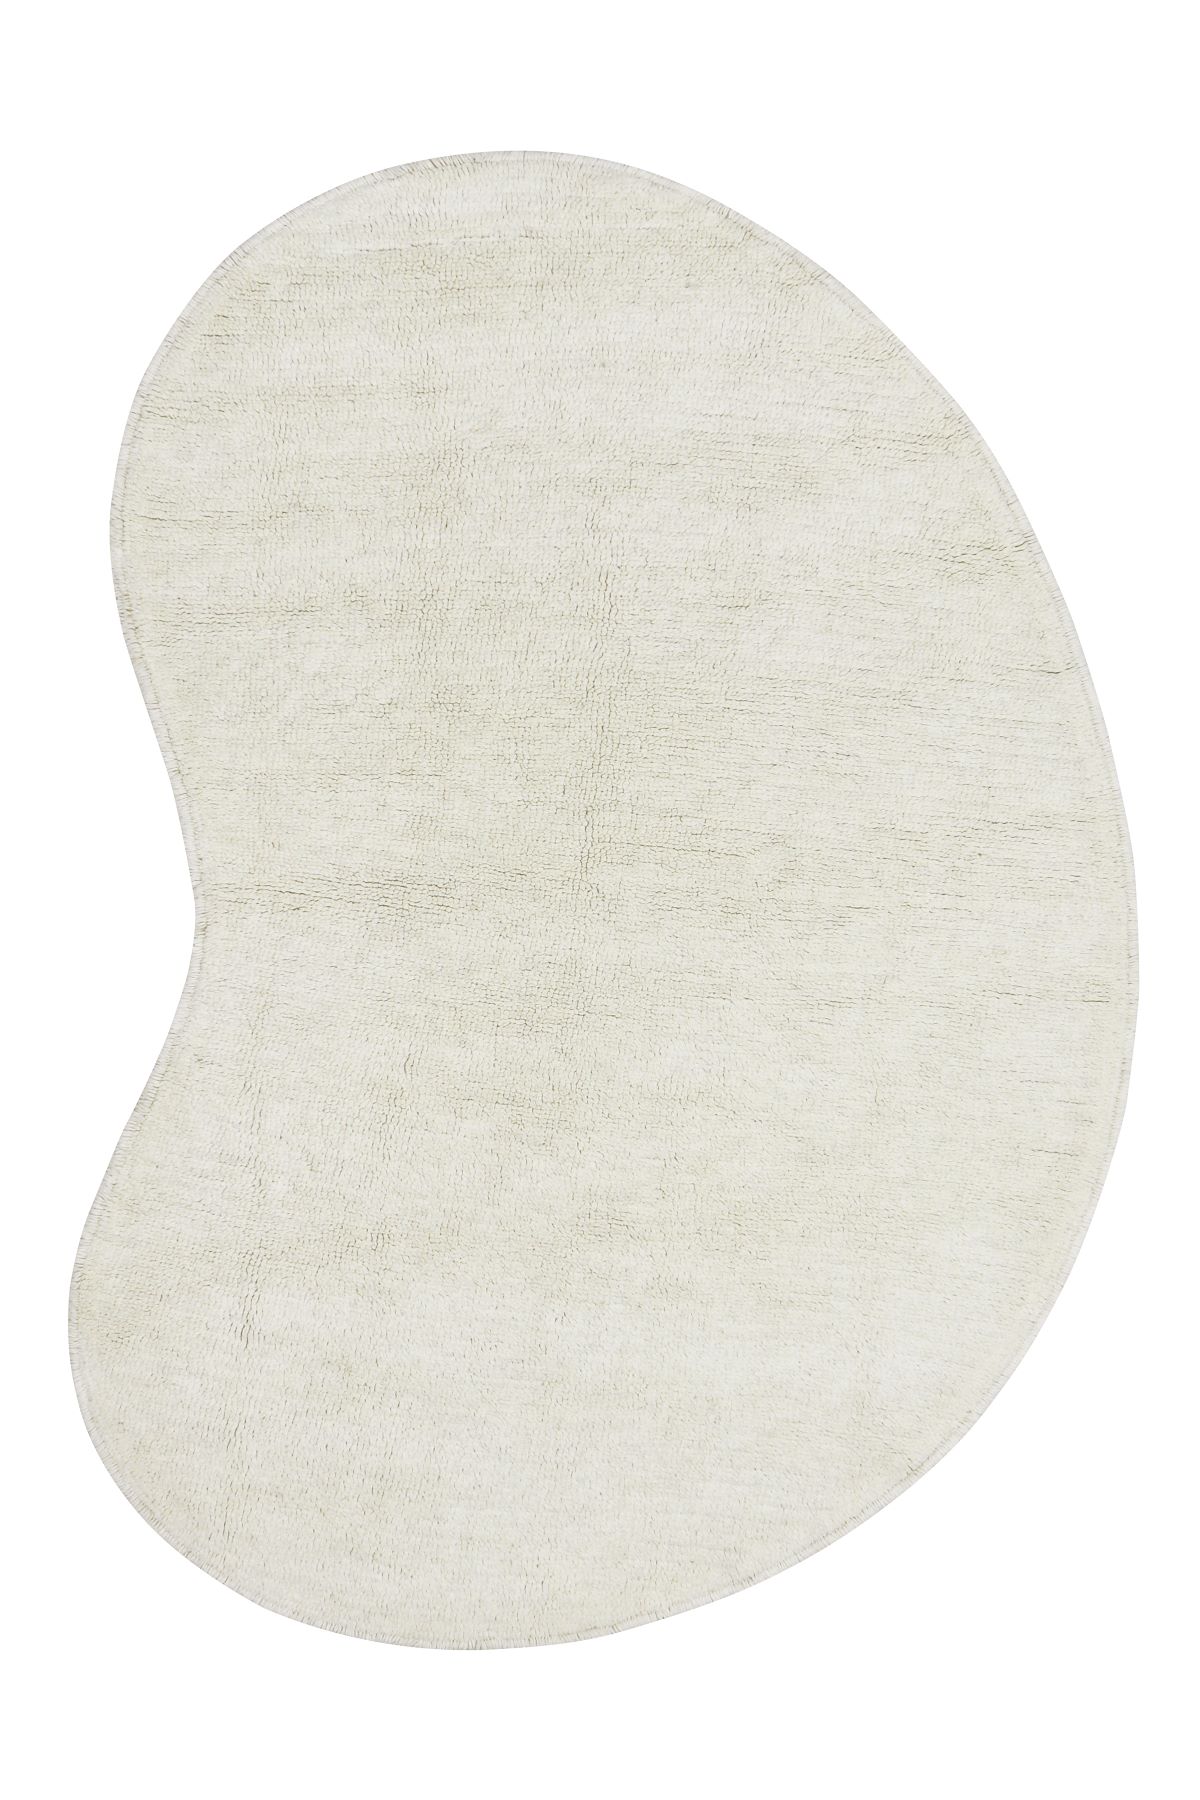 lorena-canals-rug-woolable-silhouette